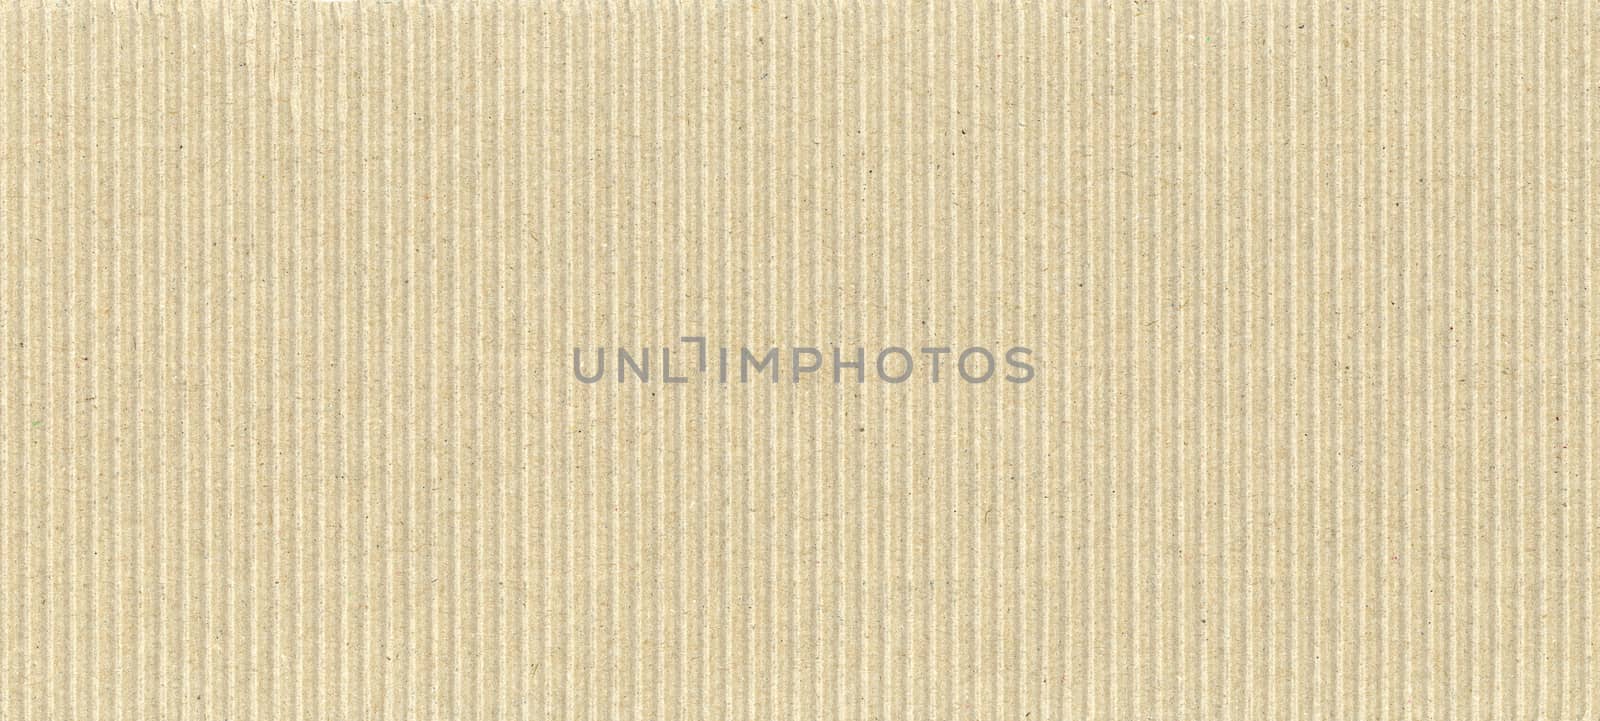 light brown corrugated cardboard texture background by claudiodivizia